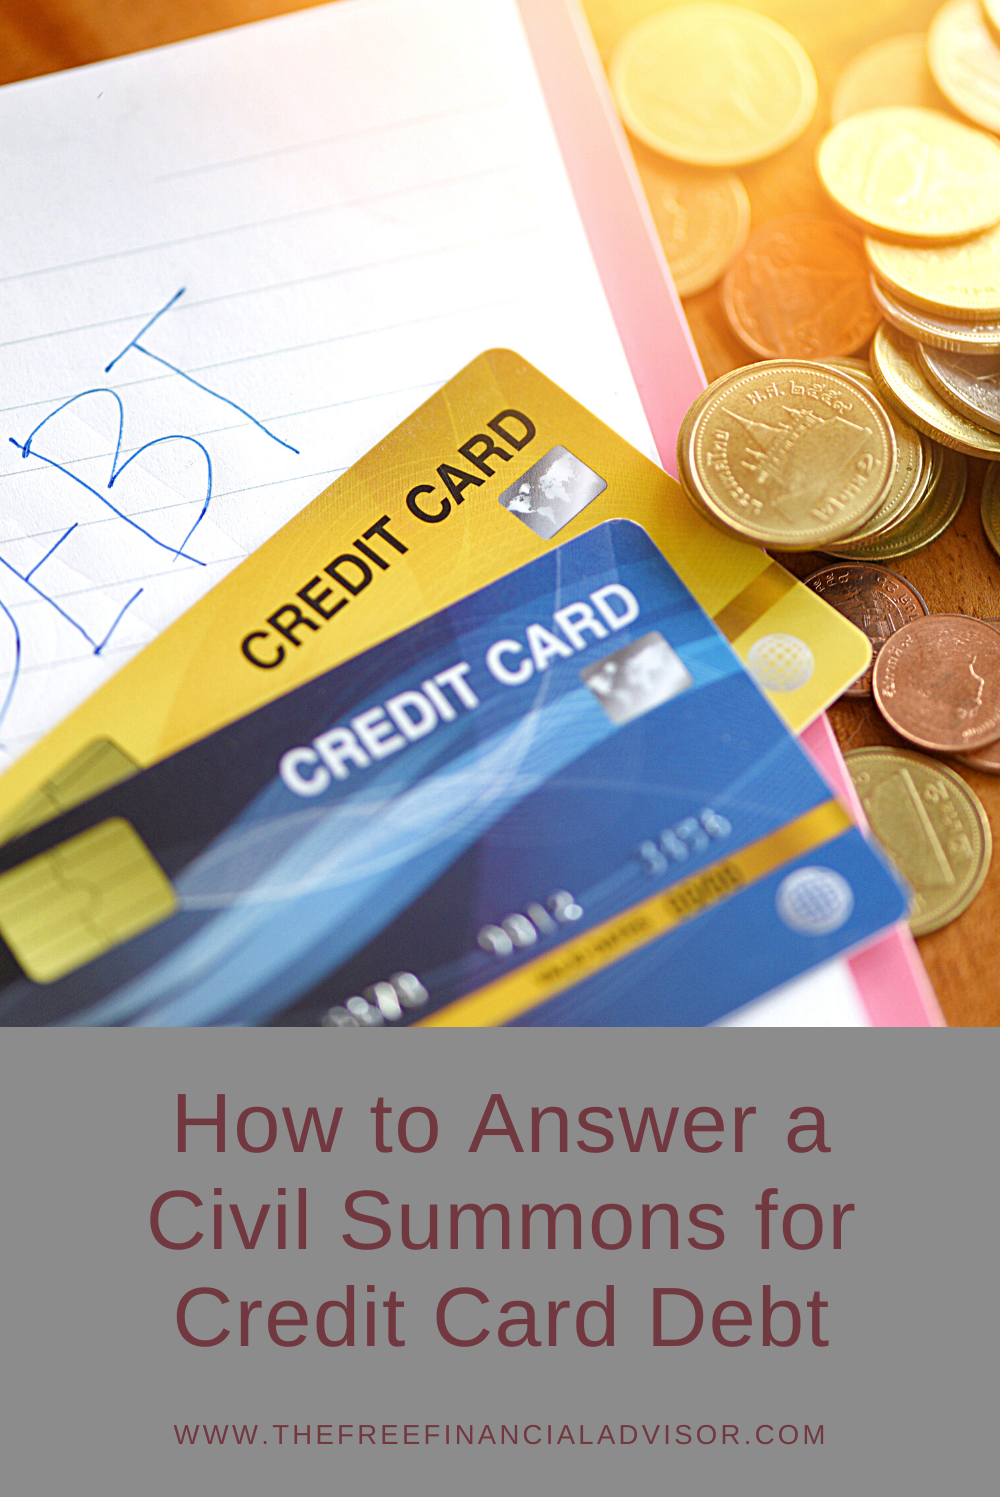 How to Answer a Civil Summons for Credit Card Debt